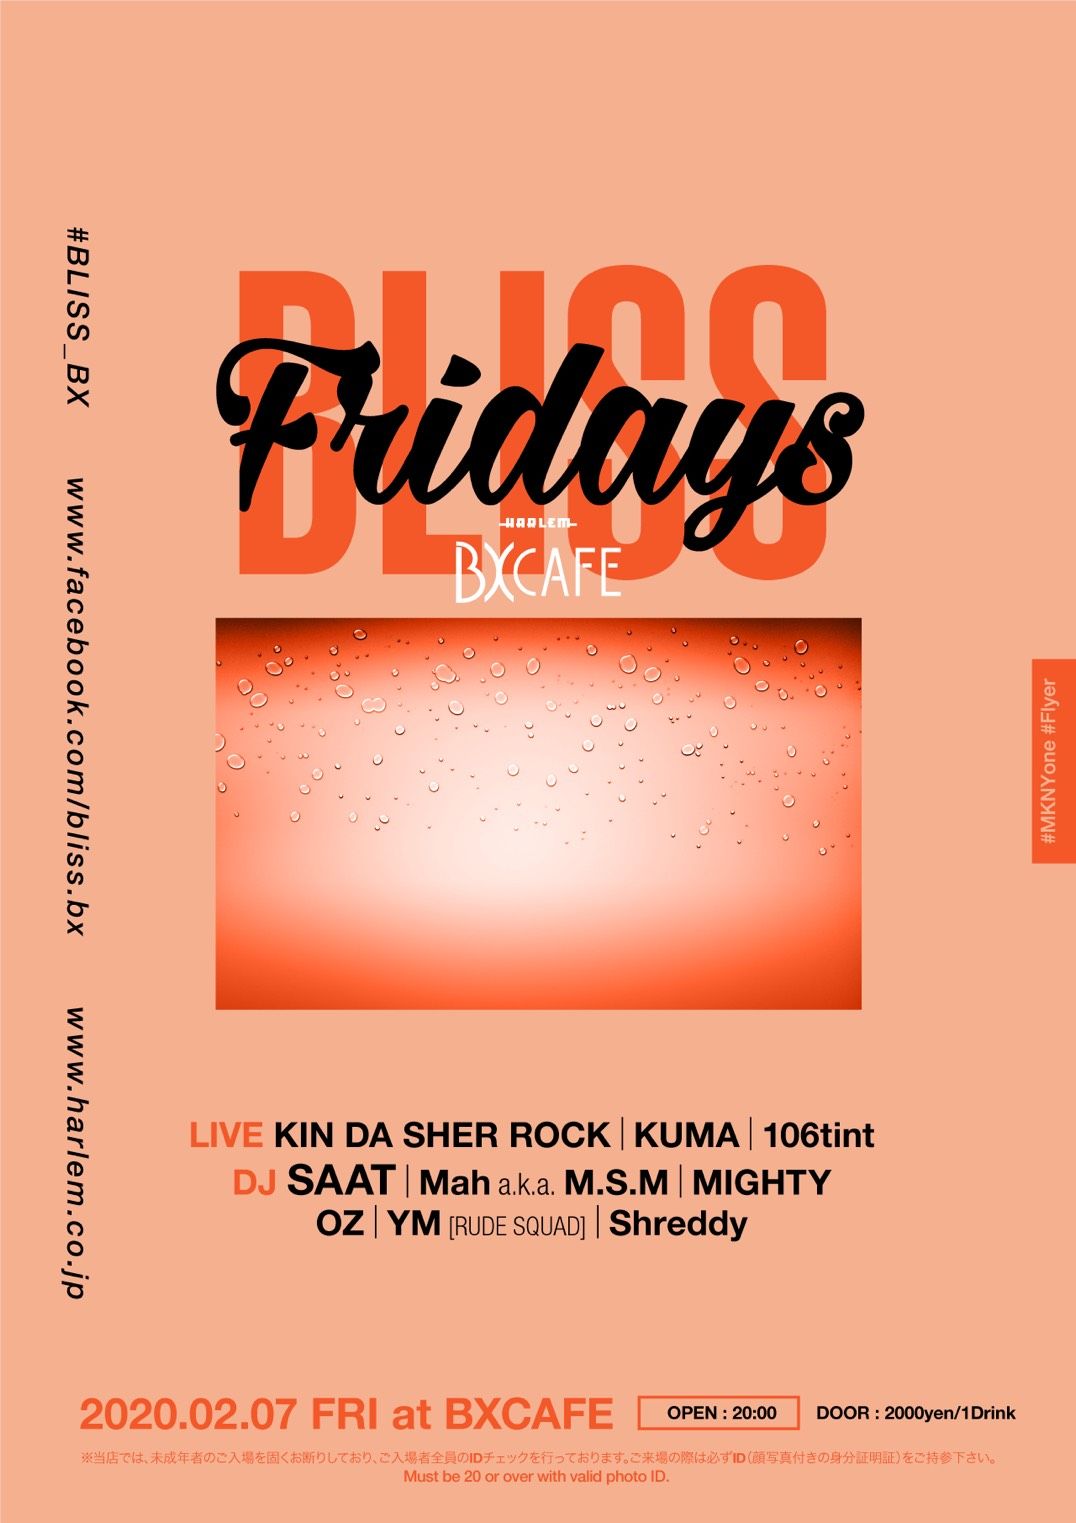 AFTER WORK EACH & EVERY FRIDAYS BLISS FRIDAYS